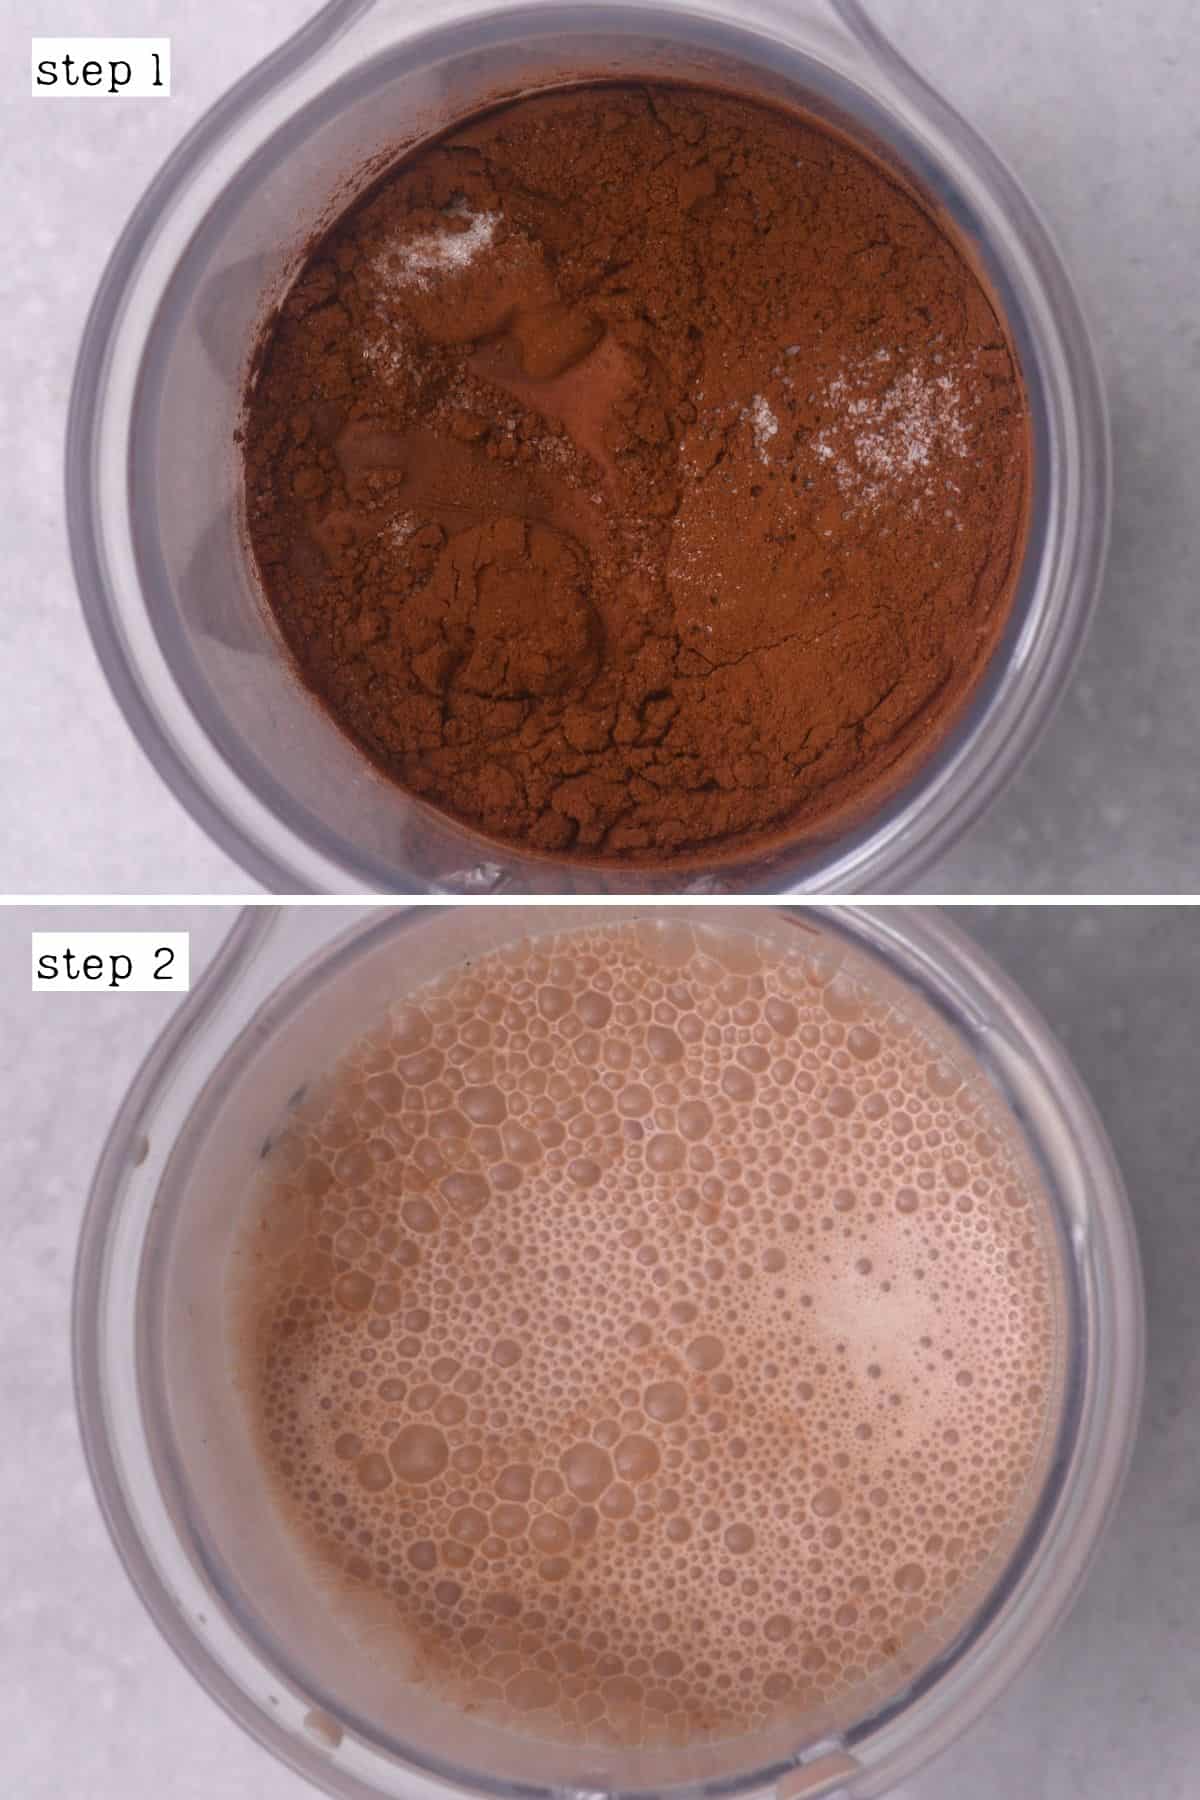 Steps for preparing milk with cacao powder